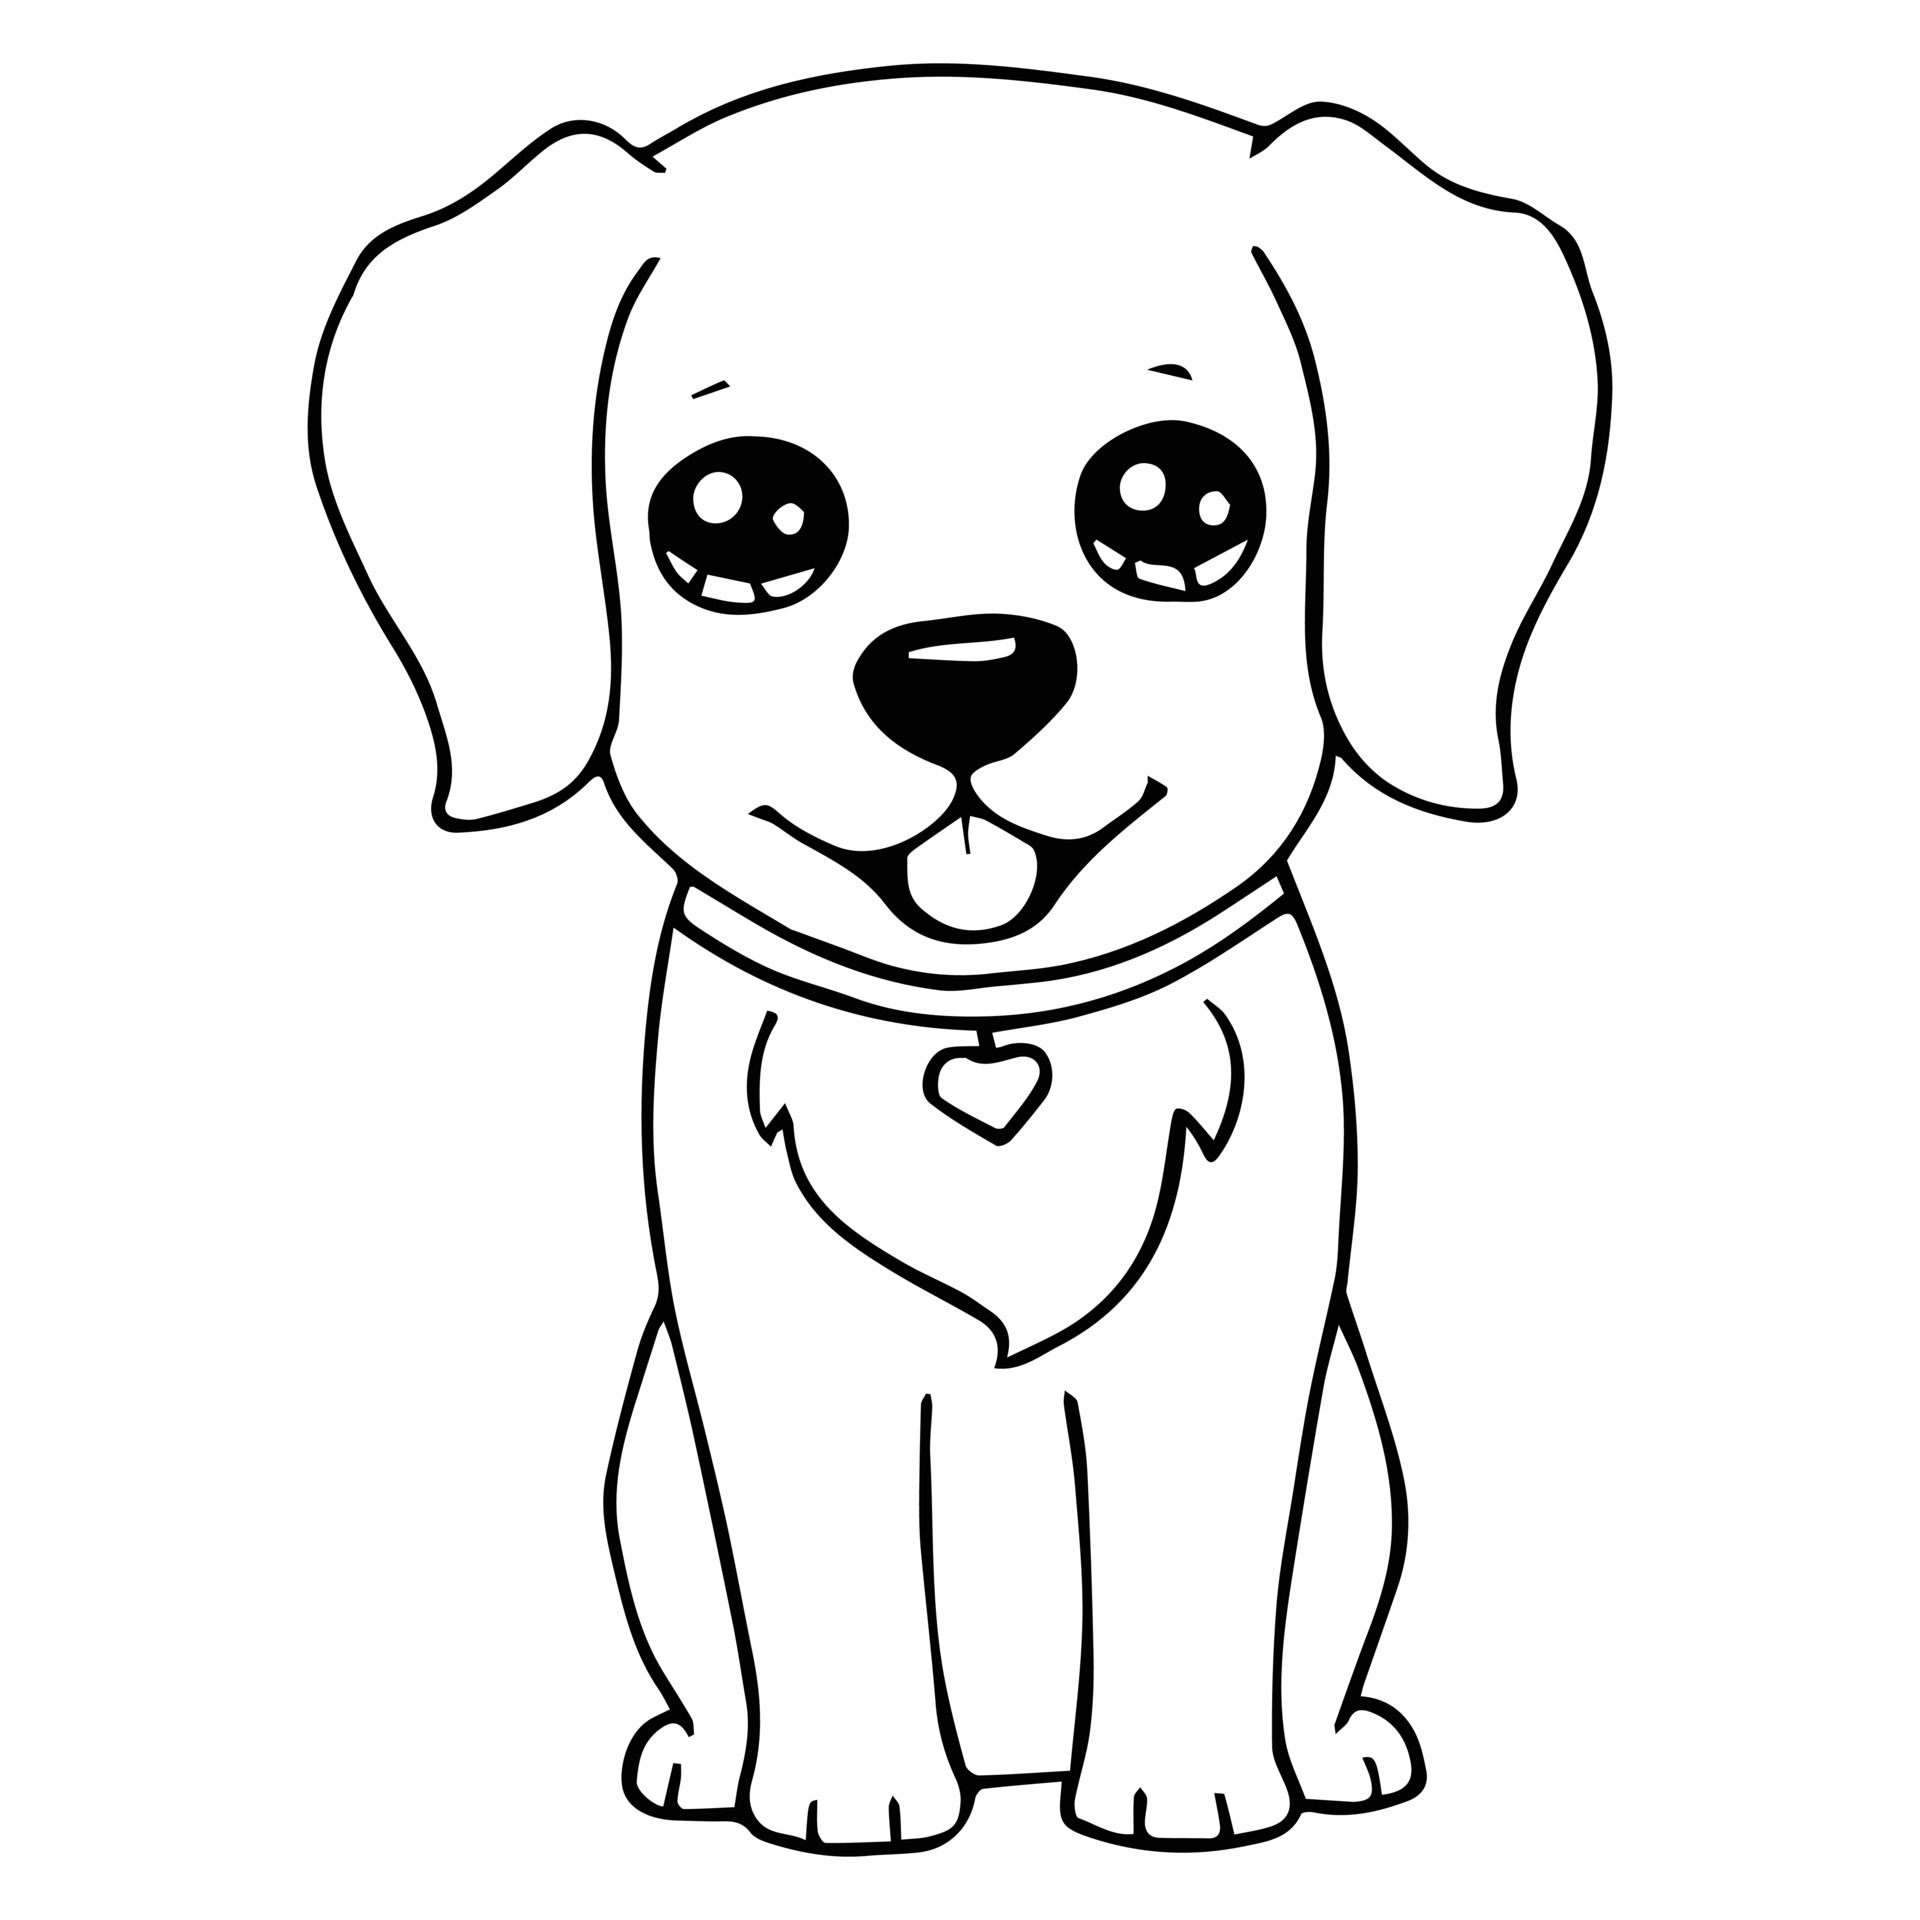 Kids Coloring Pages, Cute Dog Character Vector illustration EPS ...